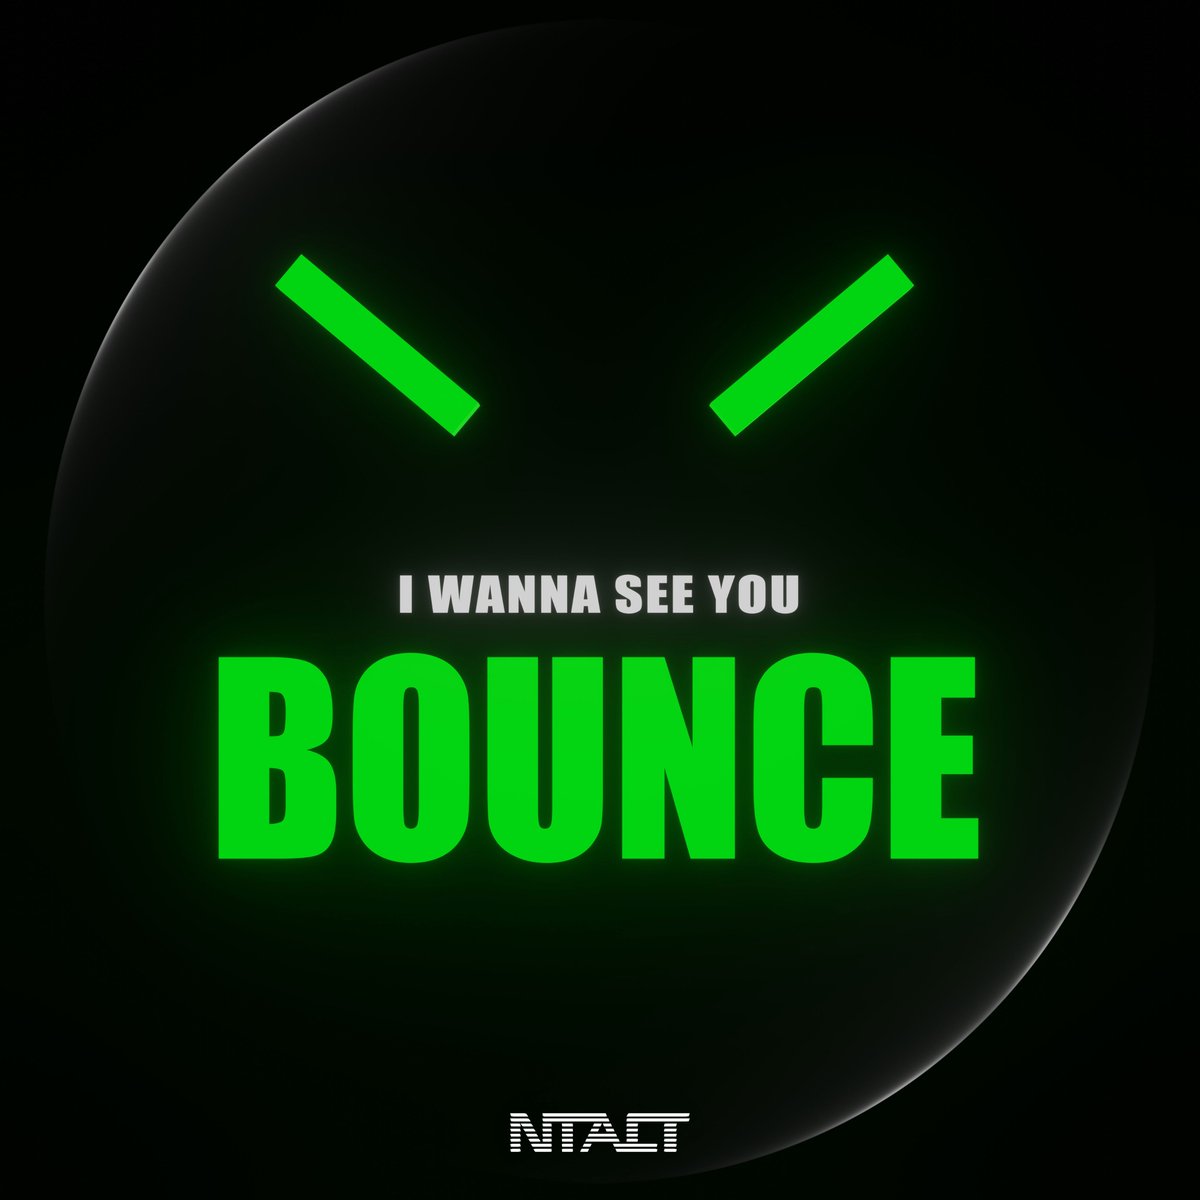 🔥 Bounce 🔥 ❗ OUT NOW ❗ 😎
I wanna see you BOUNCE !!! 🙌🏻
➡➡➡ lnk.site/ntact-bounce

#releasefriday #releaseday #newrelease #newmusic #newsong #newmusic #newmusicalert #edm #edmmusic #dance #dancemusic